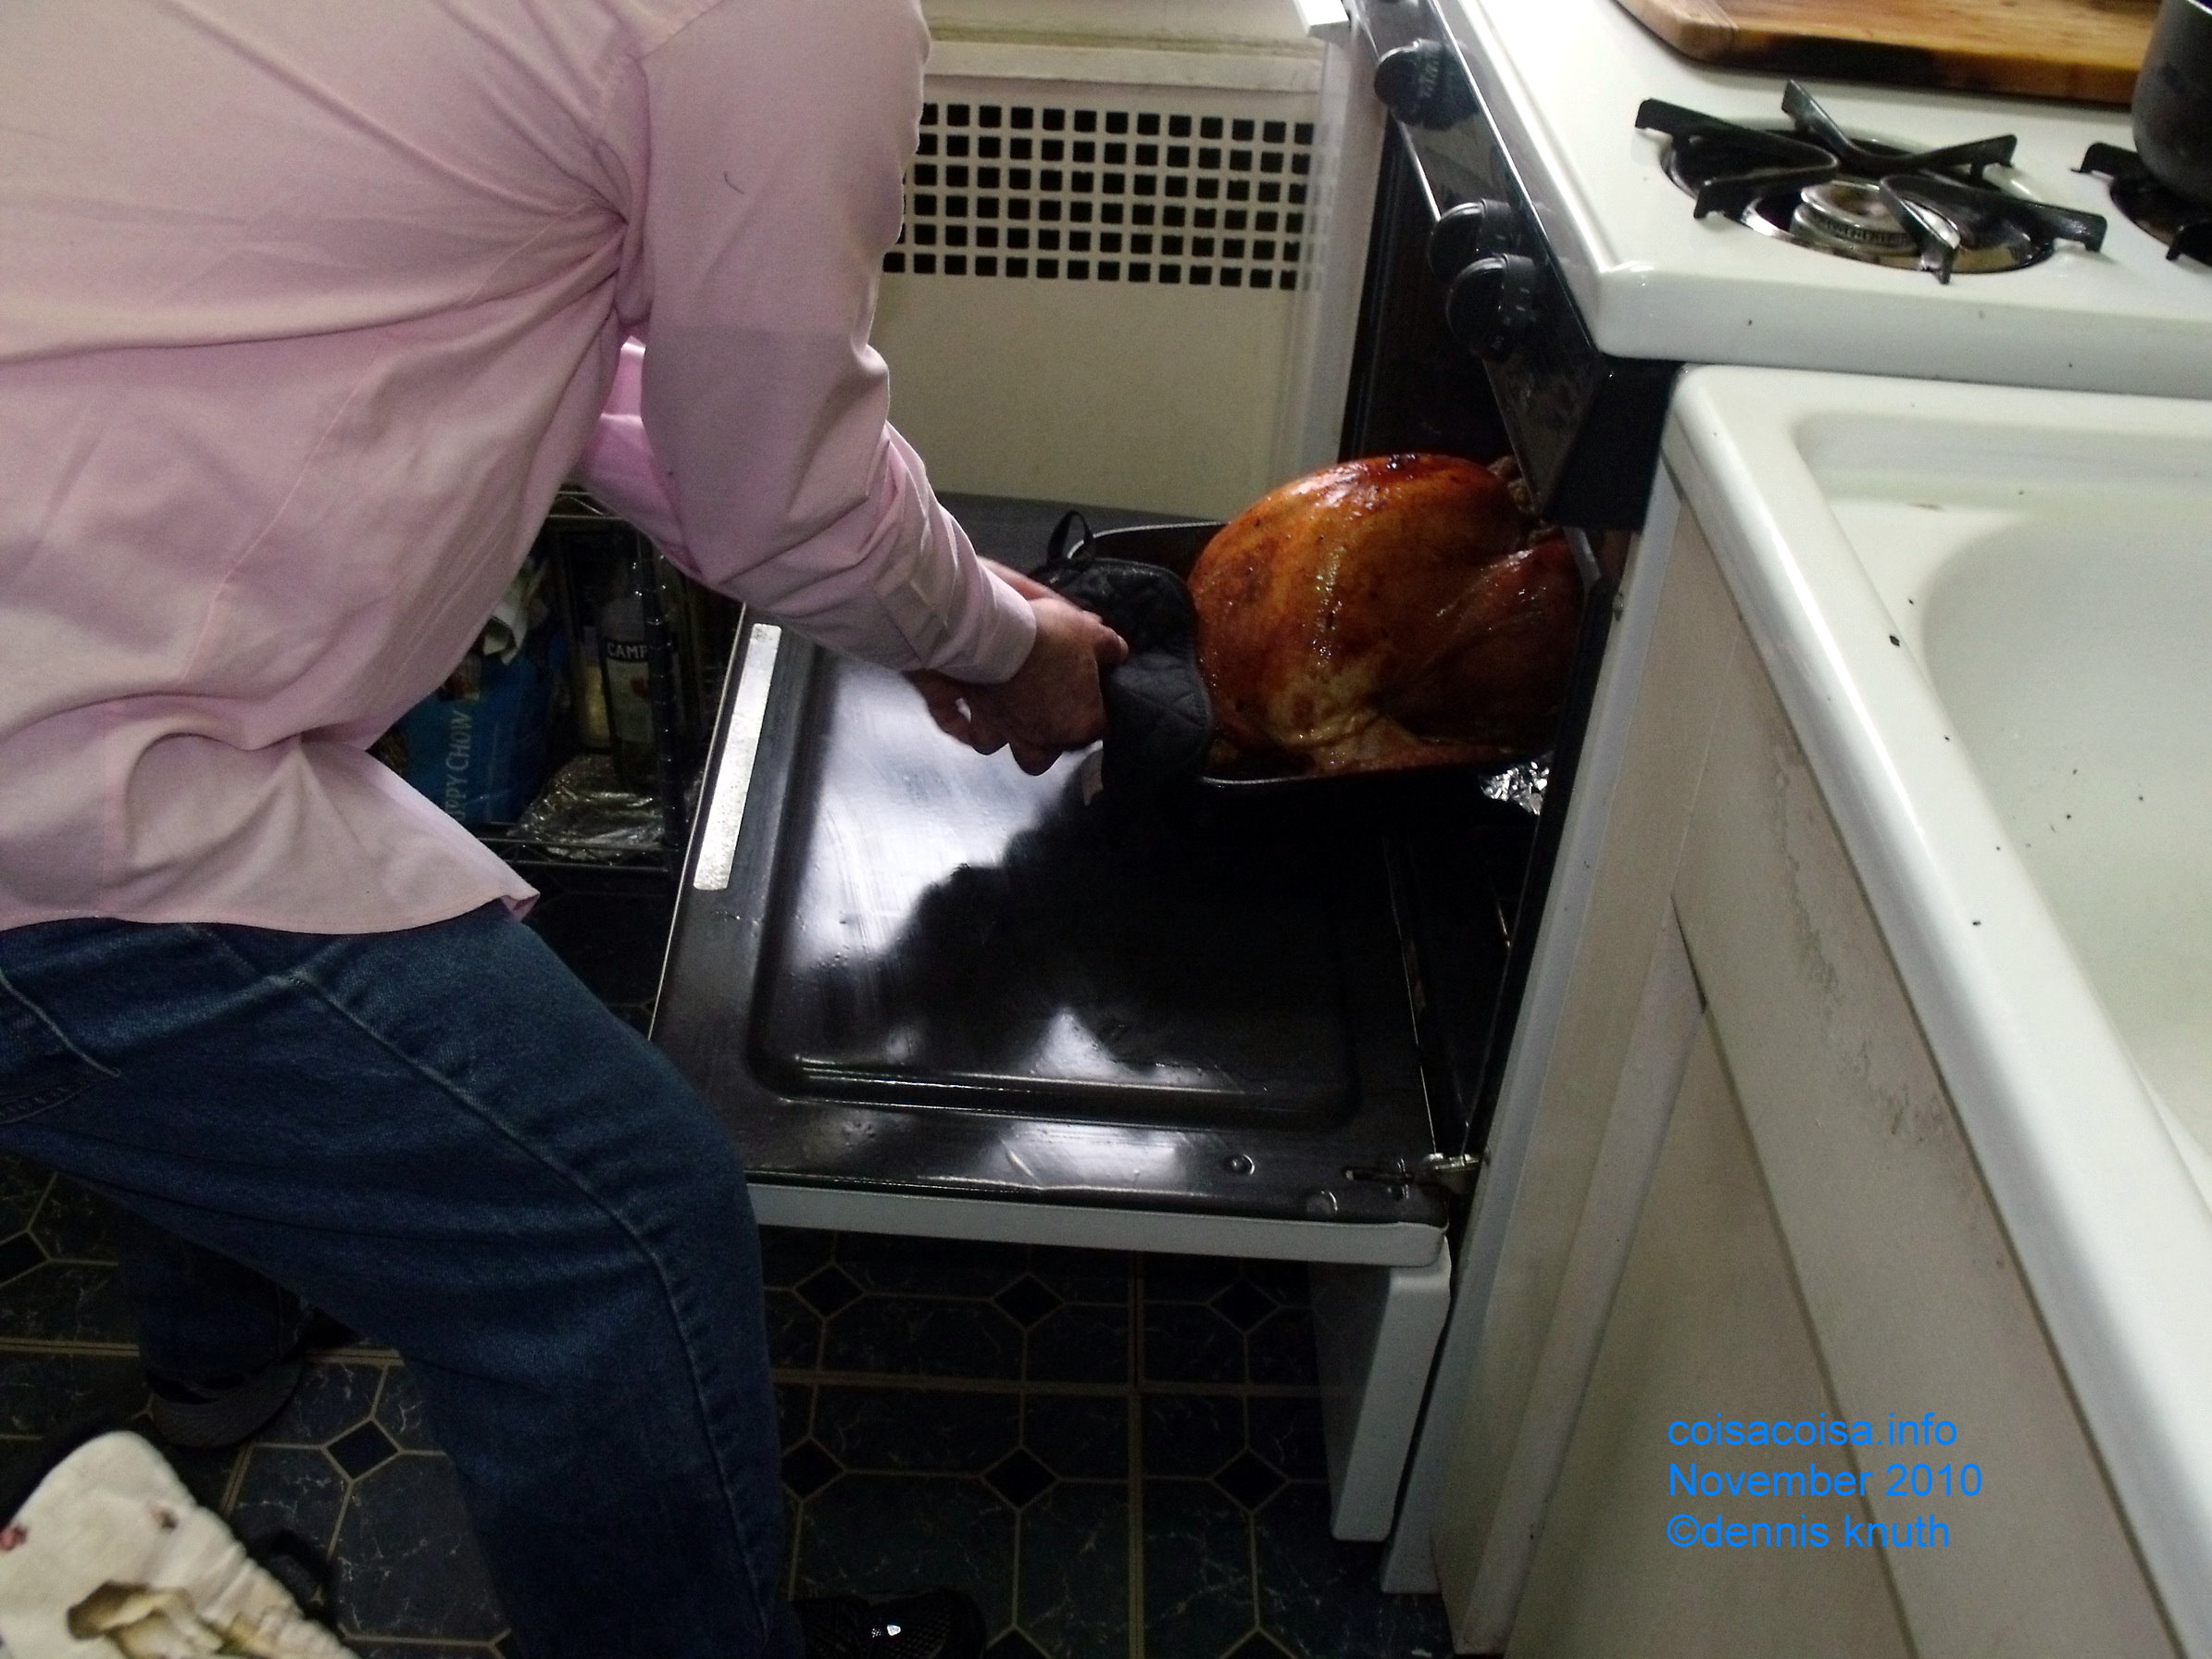 Helton checks the turkey in the Oven